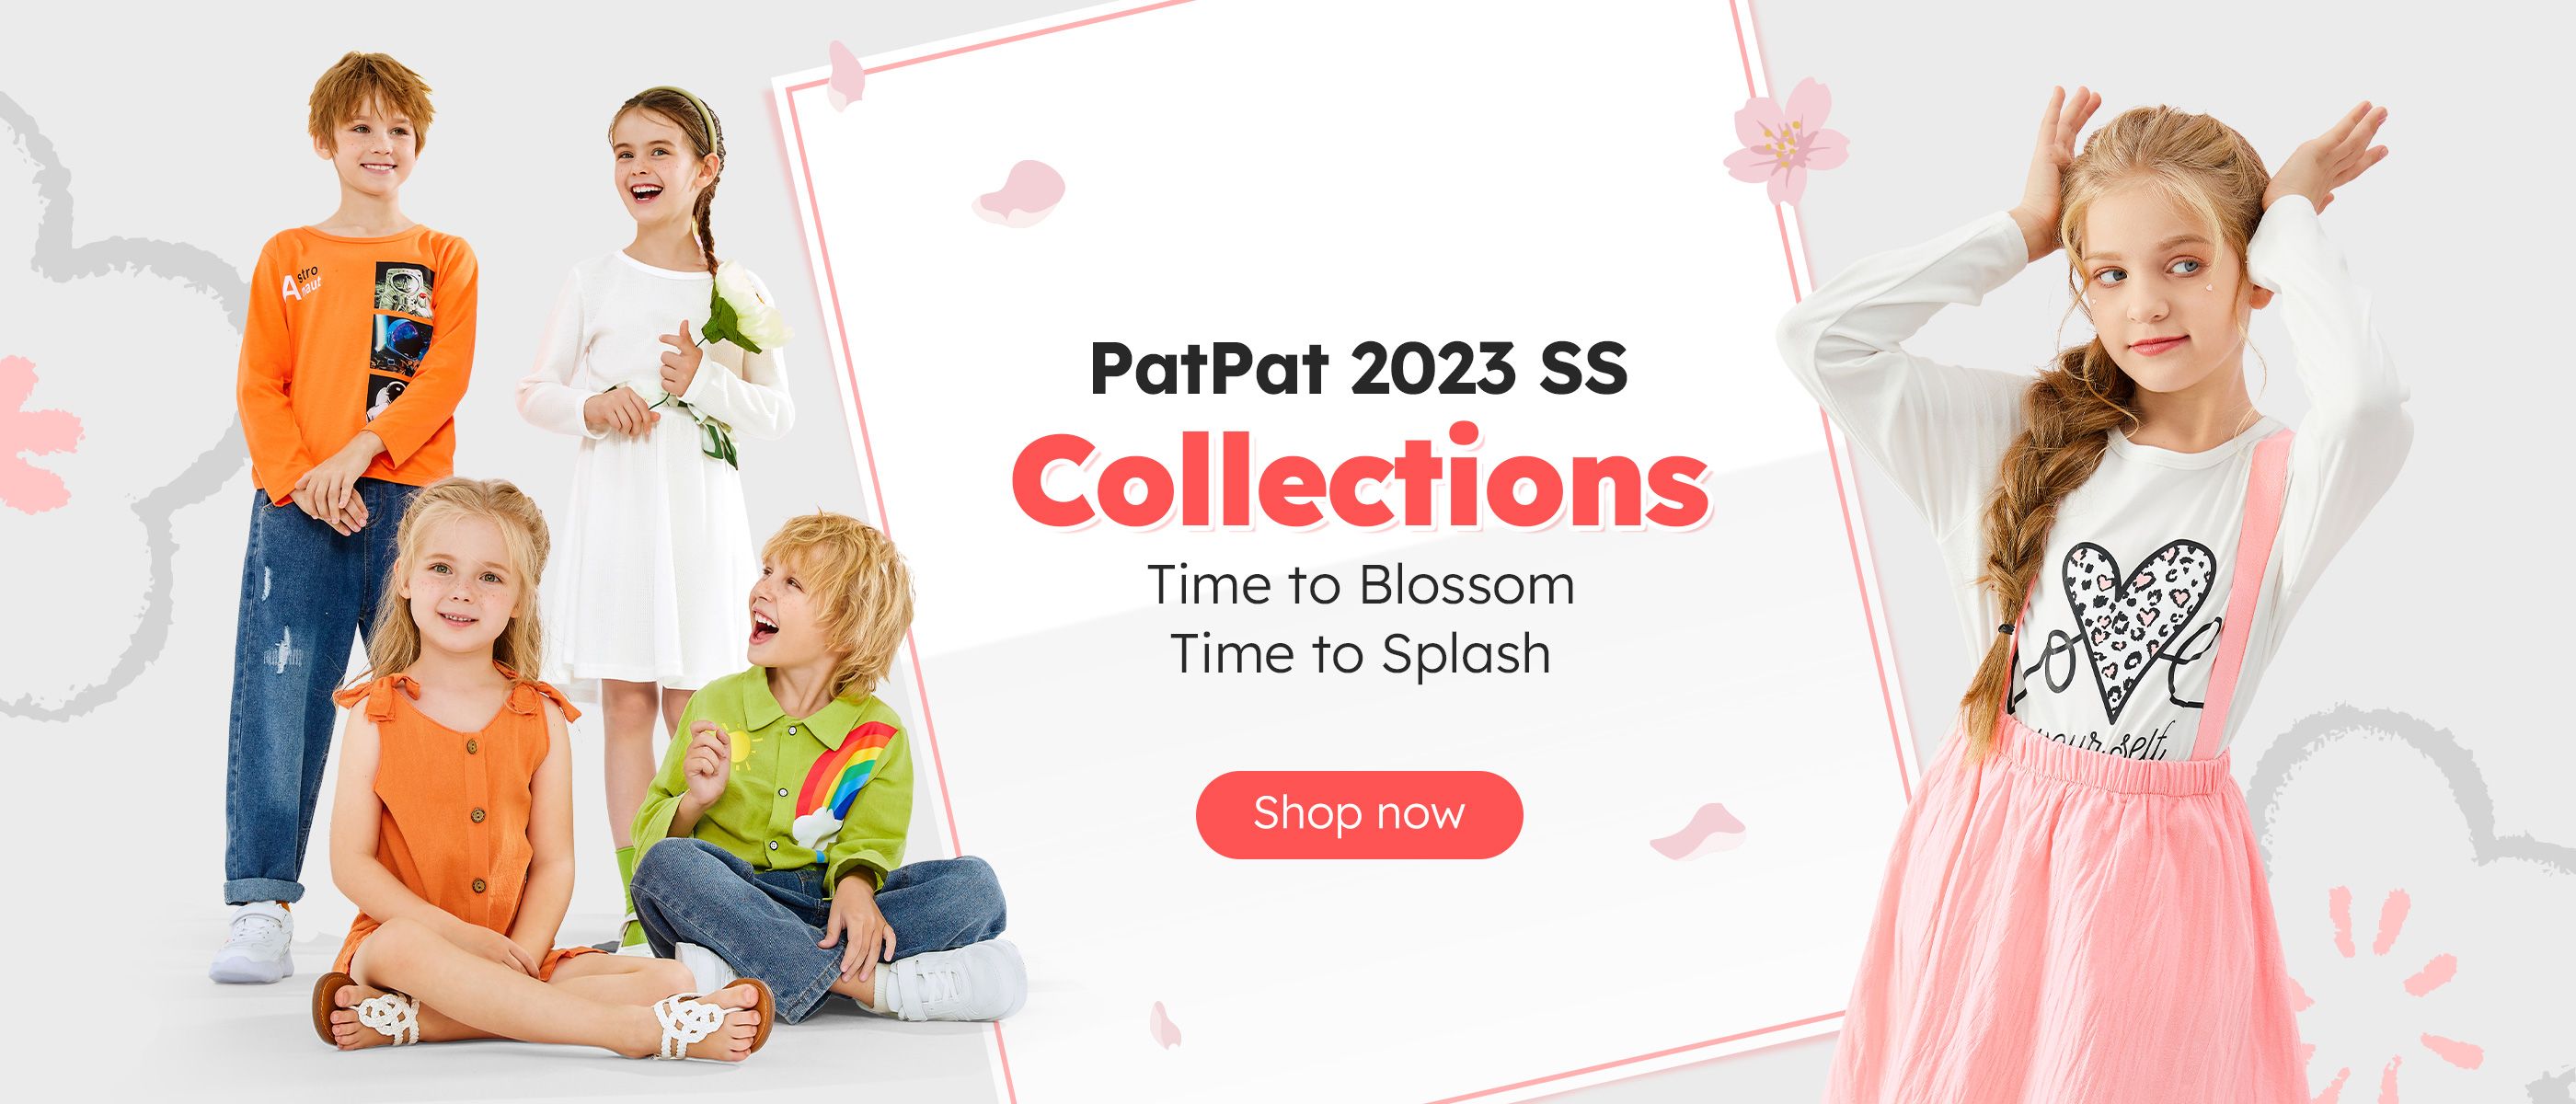 Click it to join 2023 ss collections activity